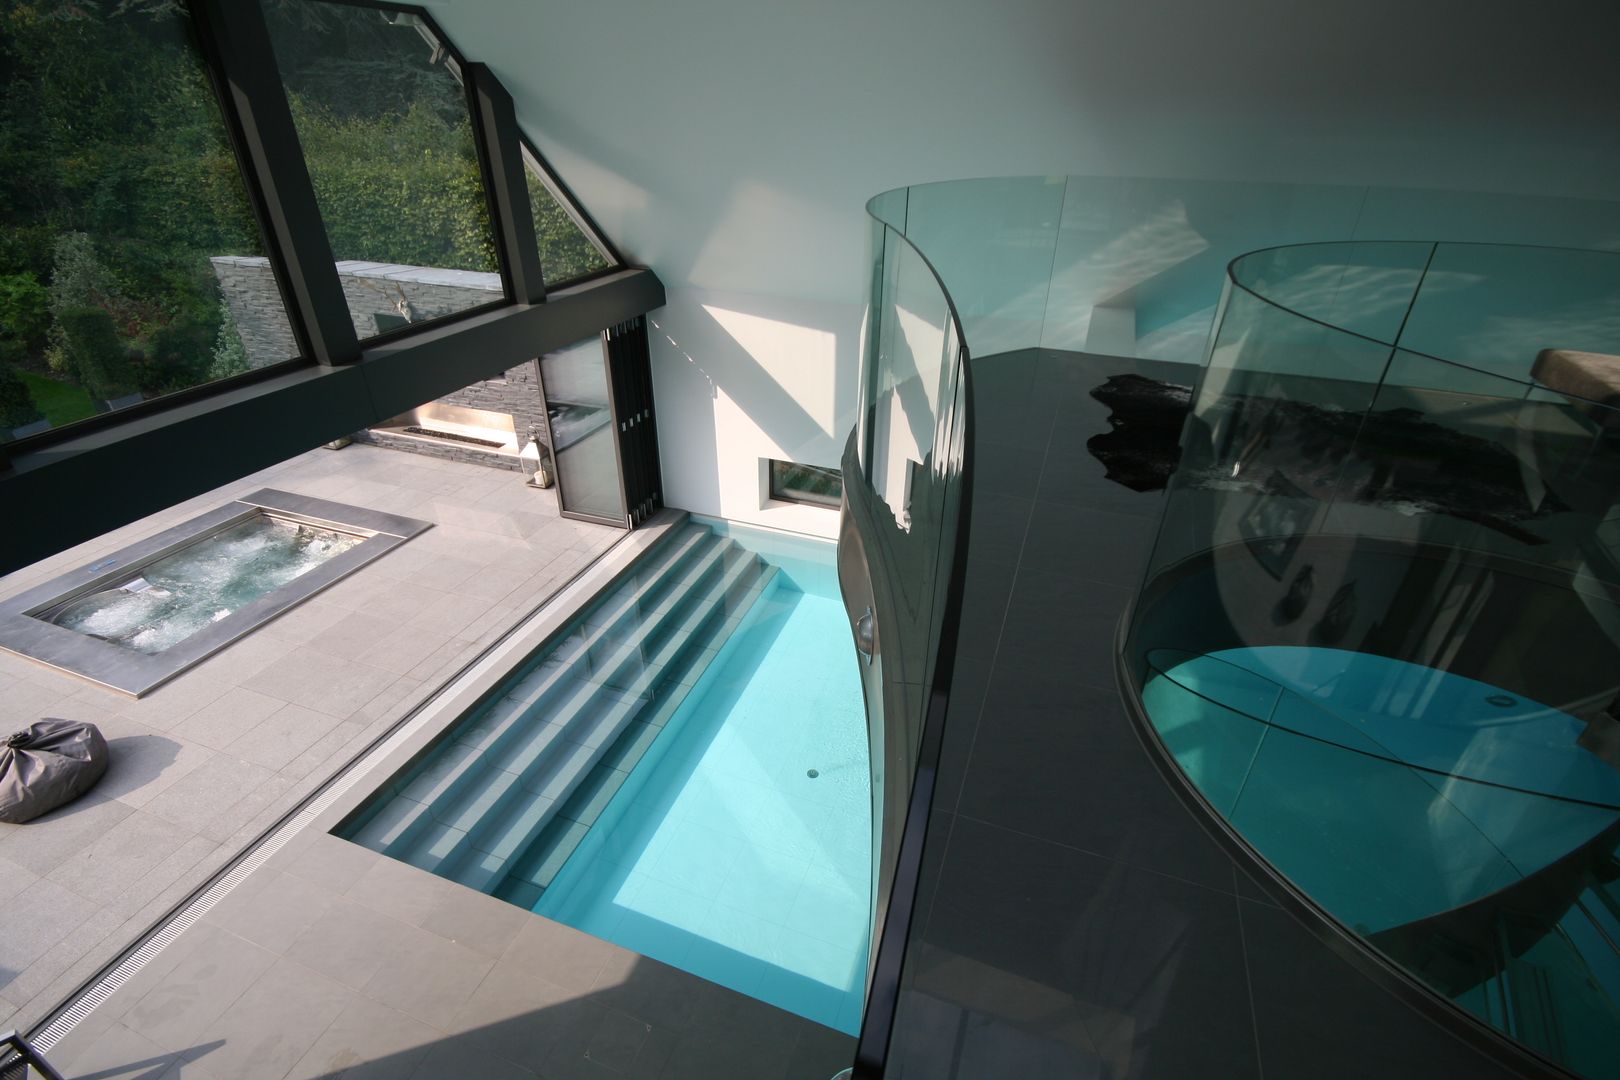 Indoor pool with waterfall features, sauna and stainless steel spa, Tanby Pools Tanby Pools Pool